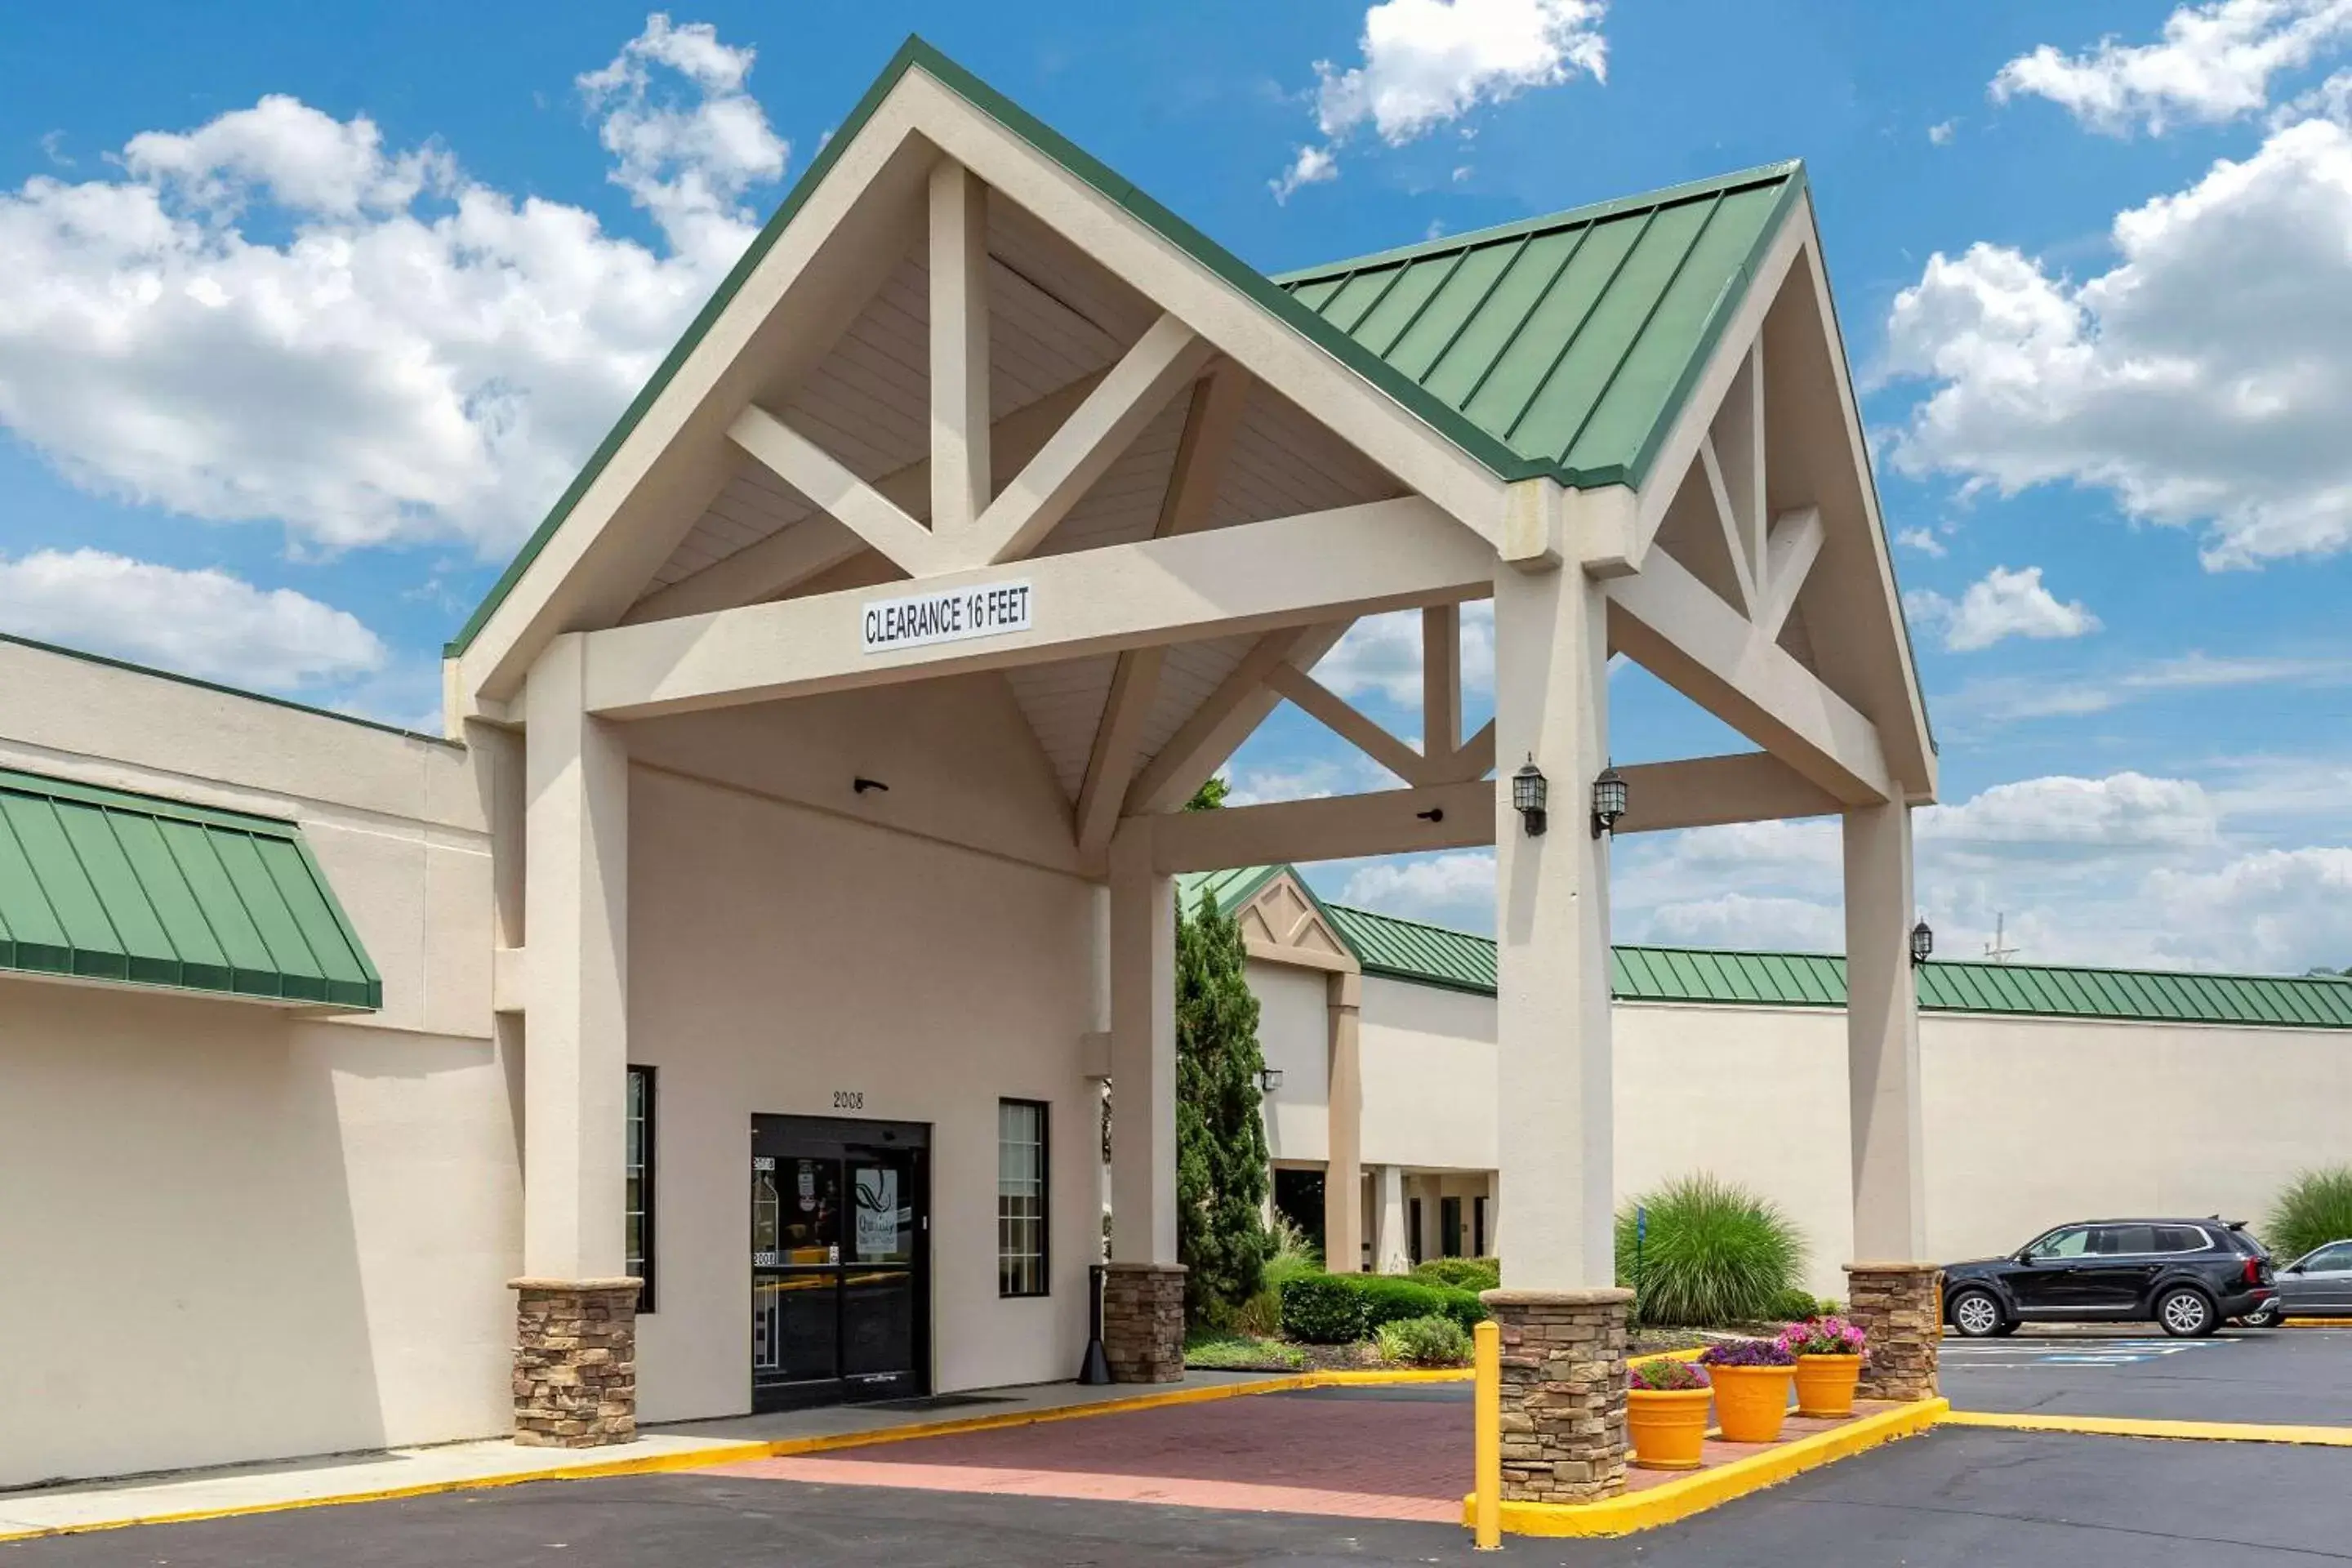 Property building, Facade/Entrance in Quality Inn & Suites Hanes Mall